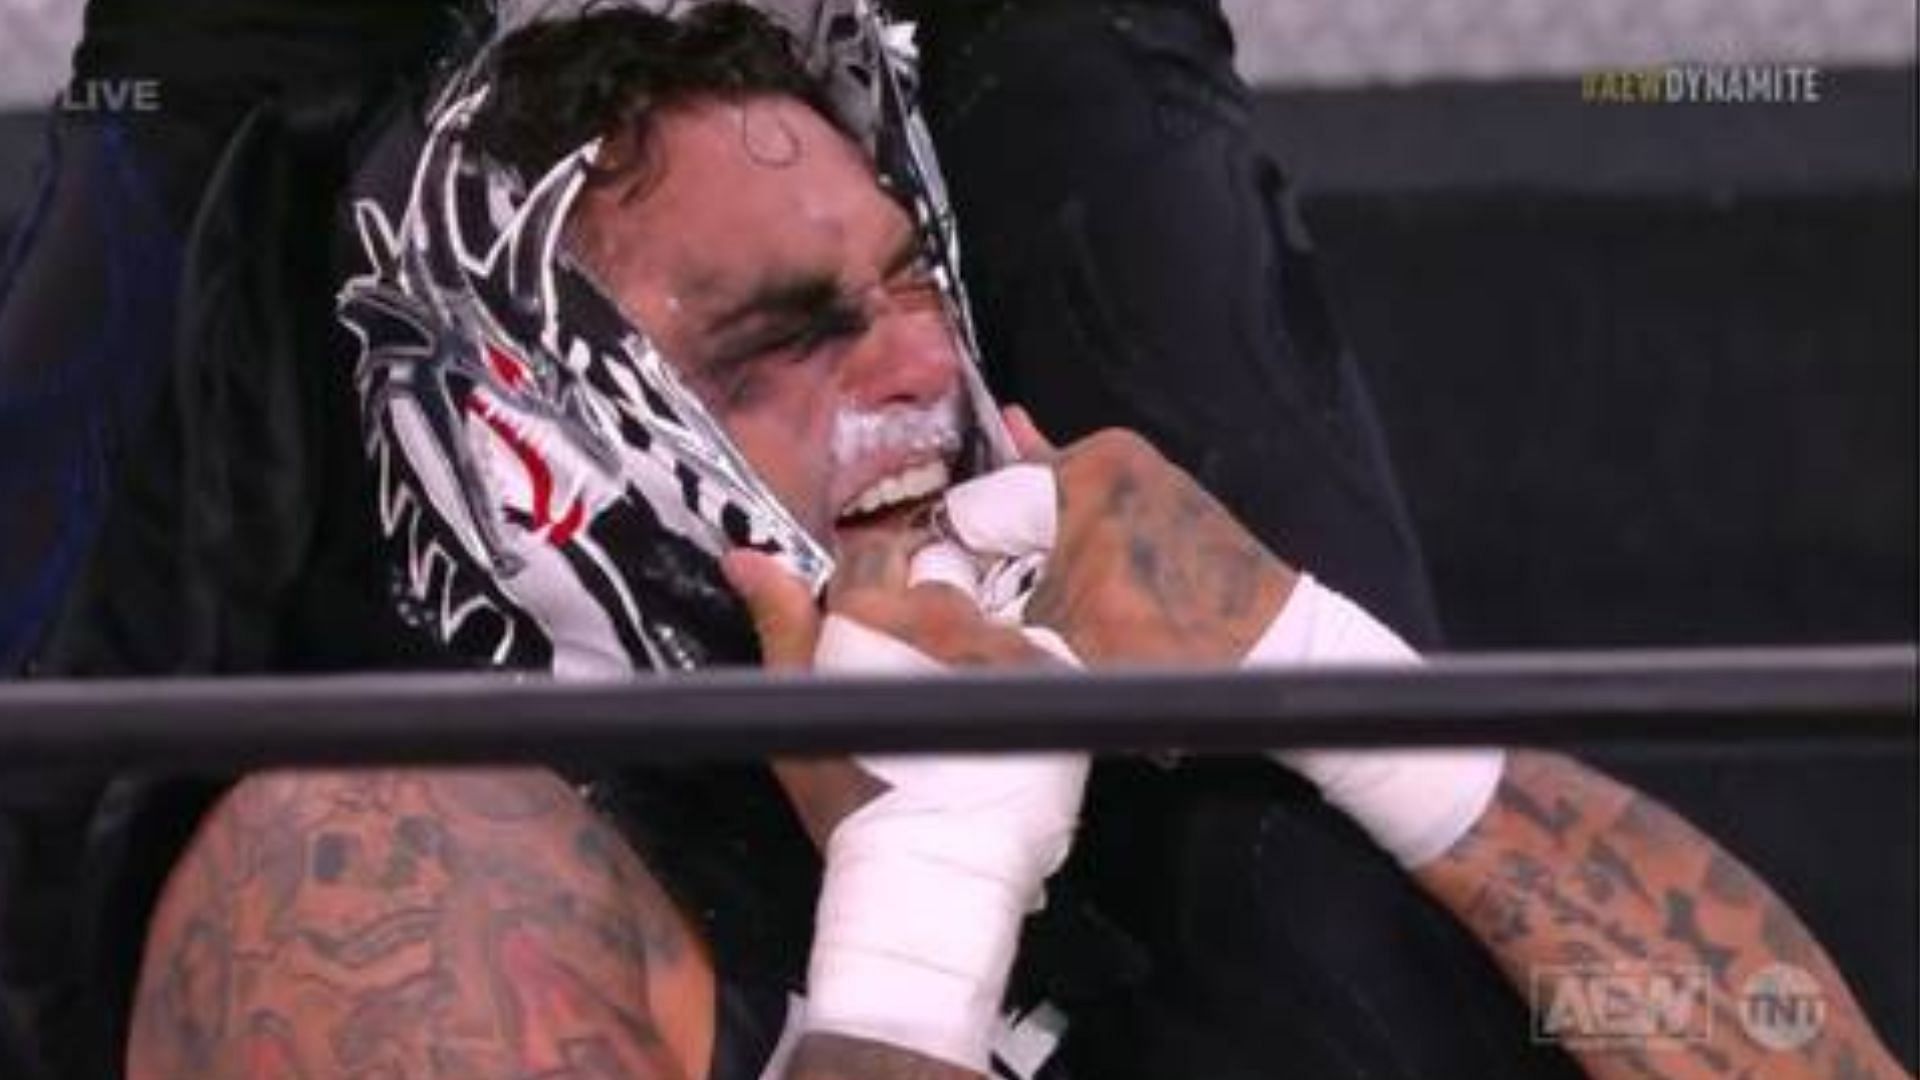 This brutal attack was the first chance AEW fans got a good look at Penta&#039;s face.